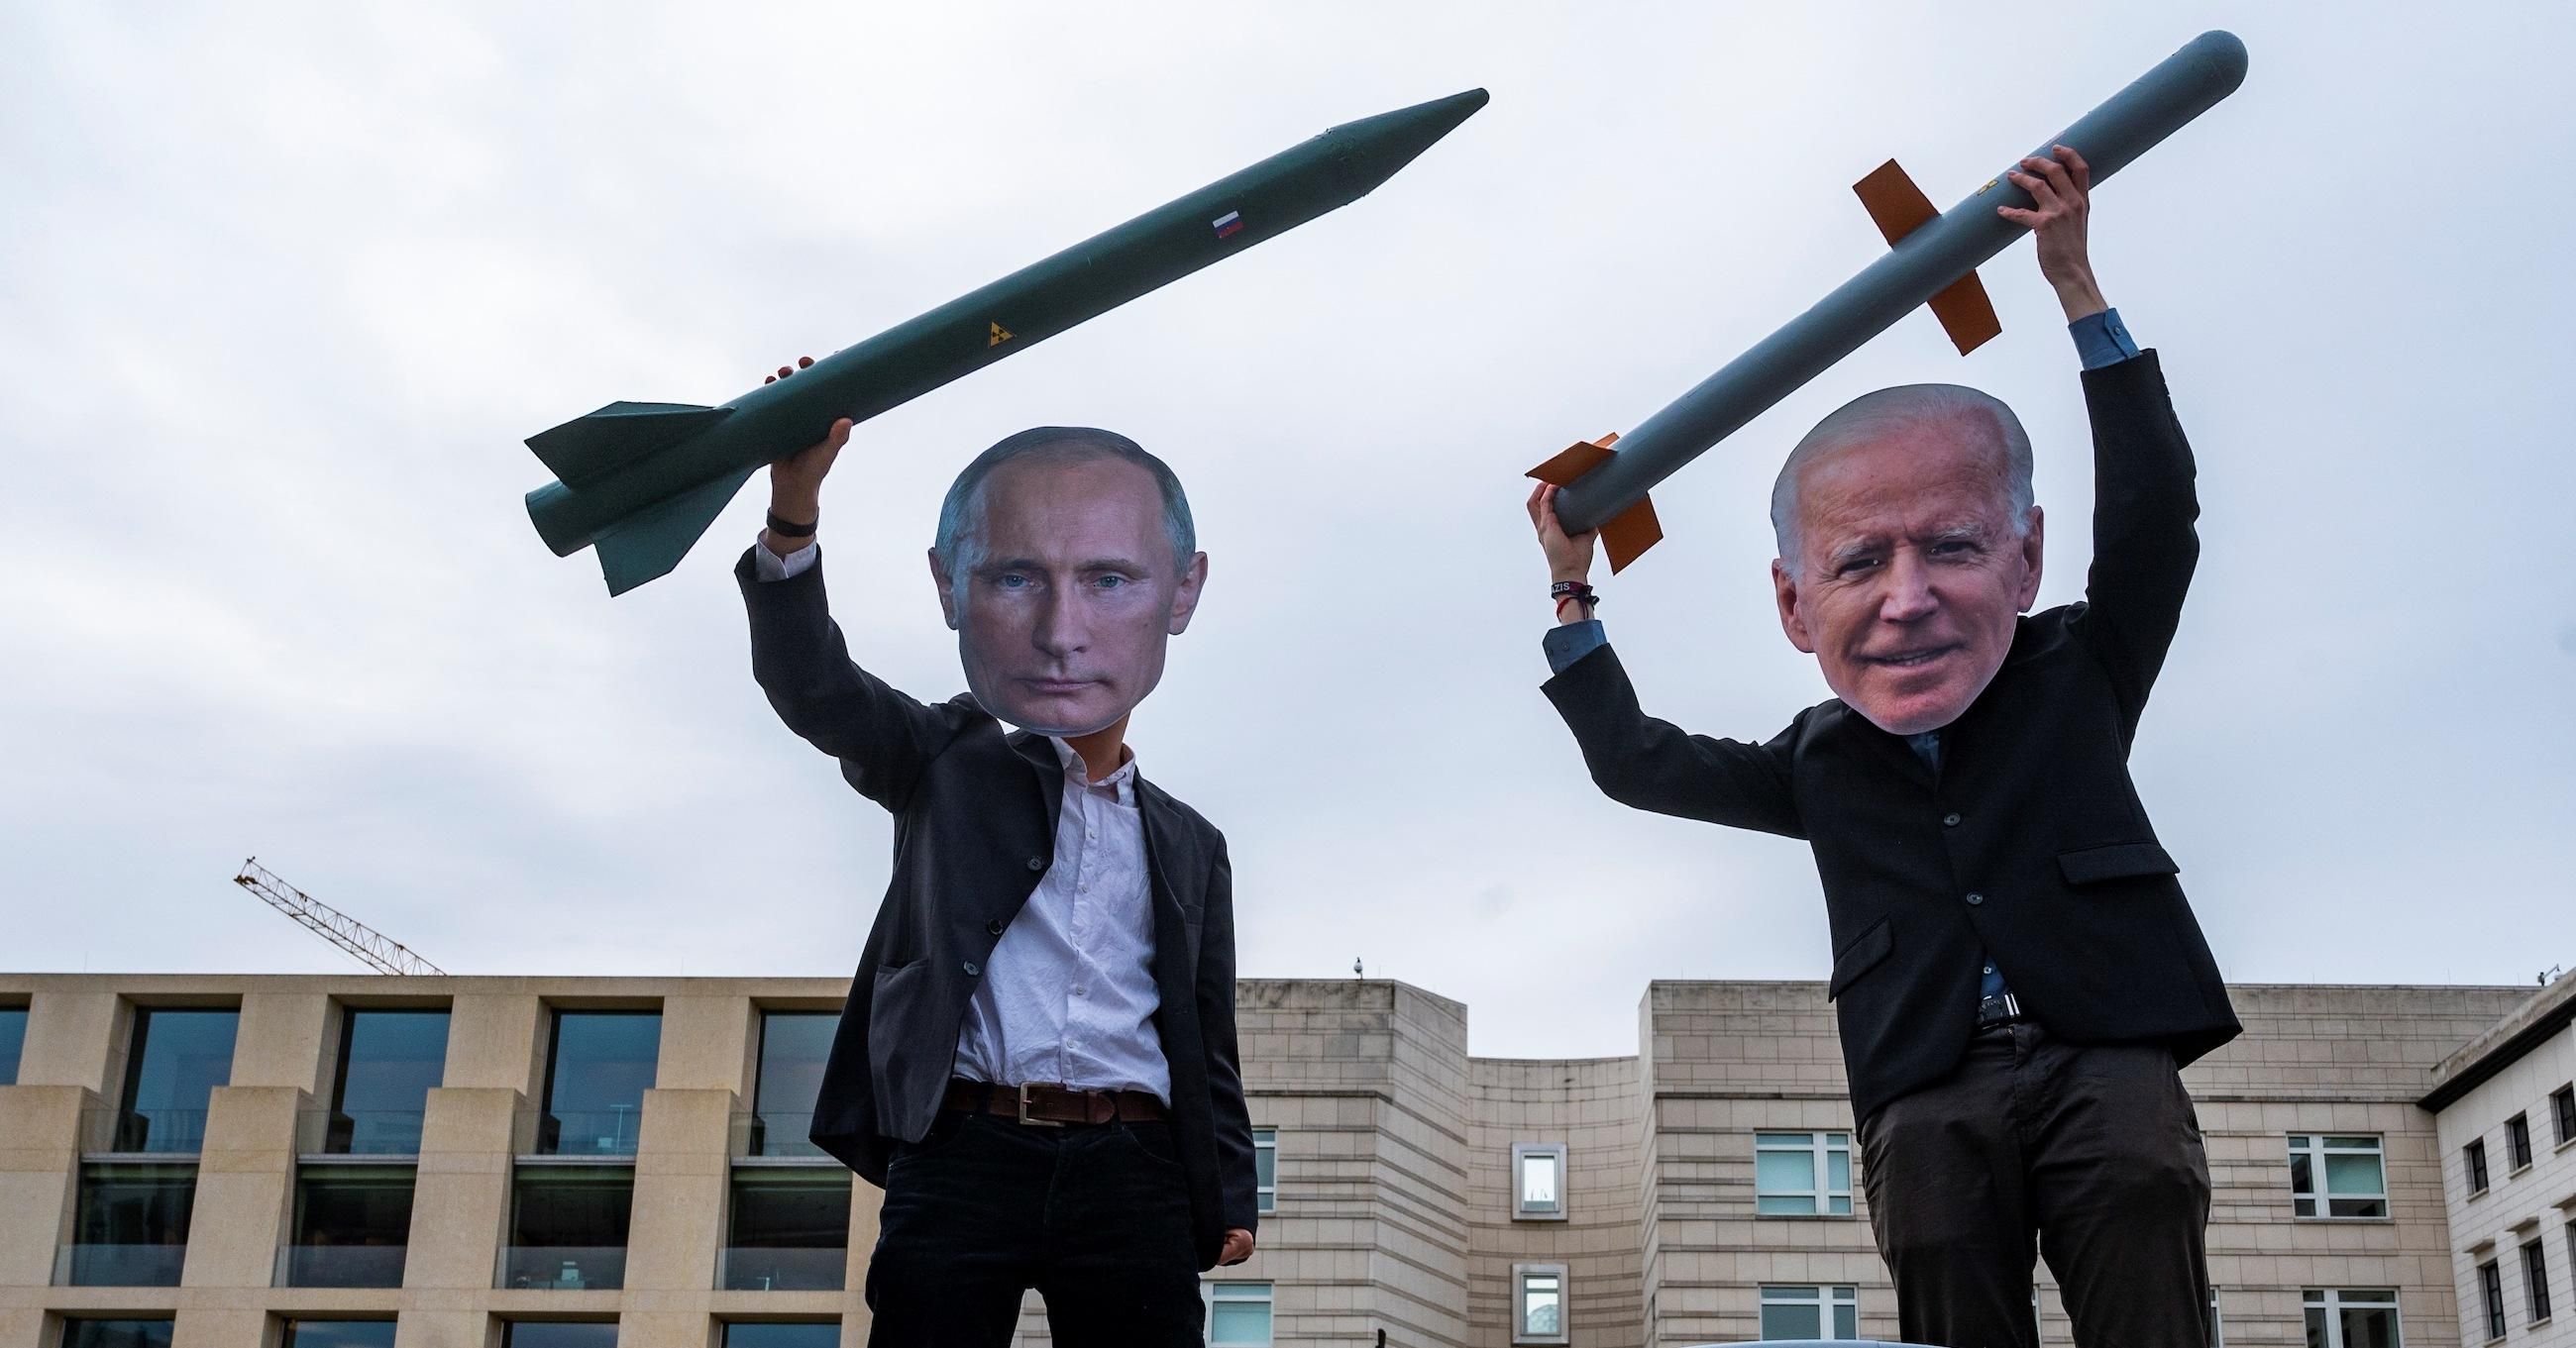 Peace activists wearing masks of Russian President Vladimir Putin (L) and U.S. President Joe Biden pose with mock nuclear missiles in front of the U.S. embassy in Berlin on January 29, 2021 in an action to call for more progress in nuclear disarmament. (Photo: John Macdougall/AFP via Getty Images)